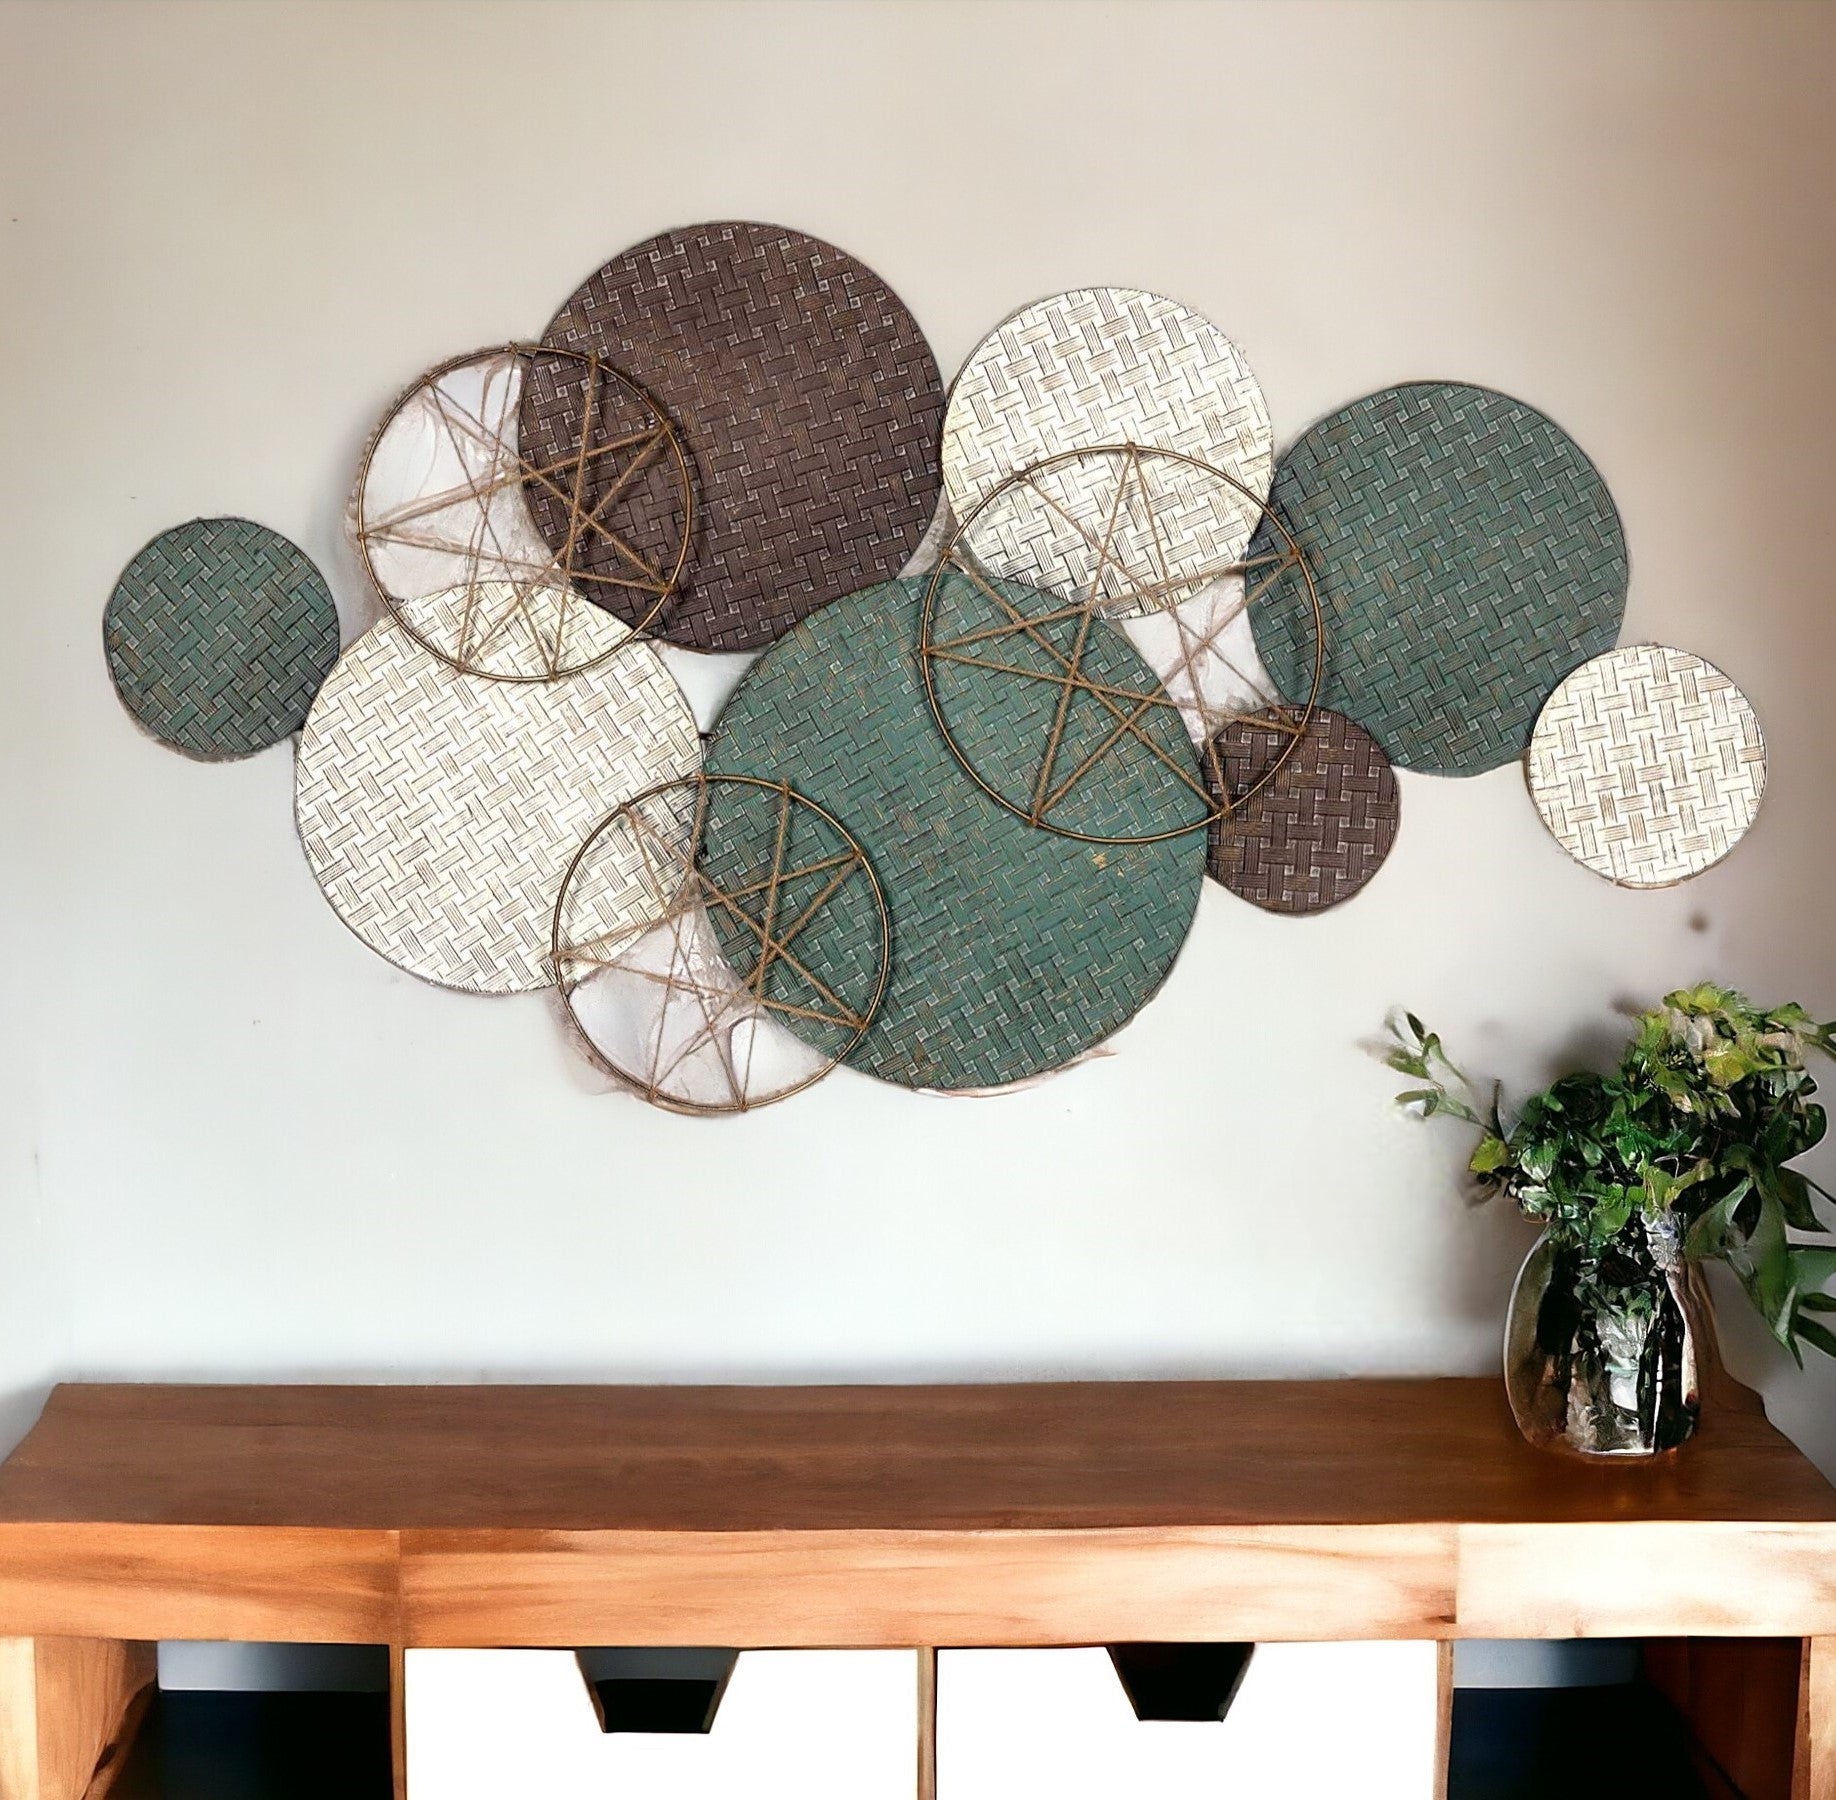 25" X 47" Bronze Green and White Metal and Jute Distressed Wall Decor